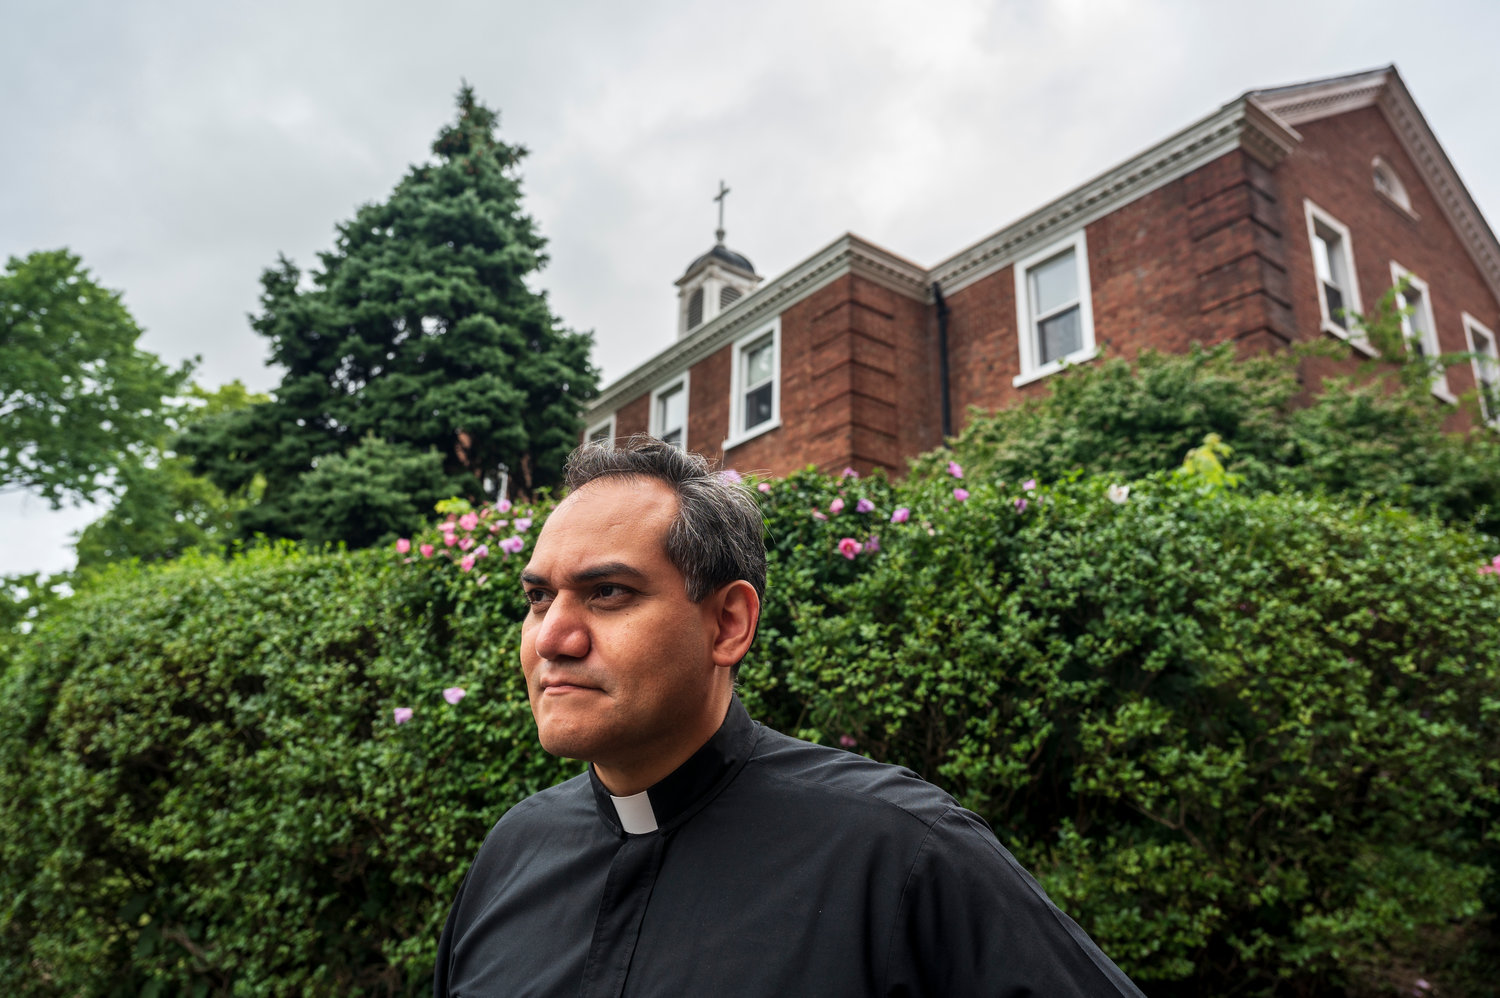 Father Joseph Franco takes over as lead pastor of Our Lady of Angels Church in Kingsbridge Heights, bringing with him not only a significant amount of experience in a similar role at nearby Sacred Heart Church in Highbridge, but also some deep Bronx roots — including having Manhattan College as his alma mater.